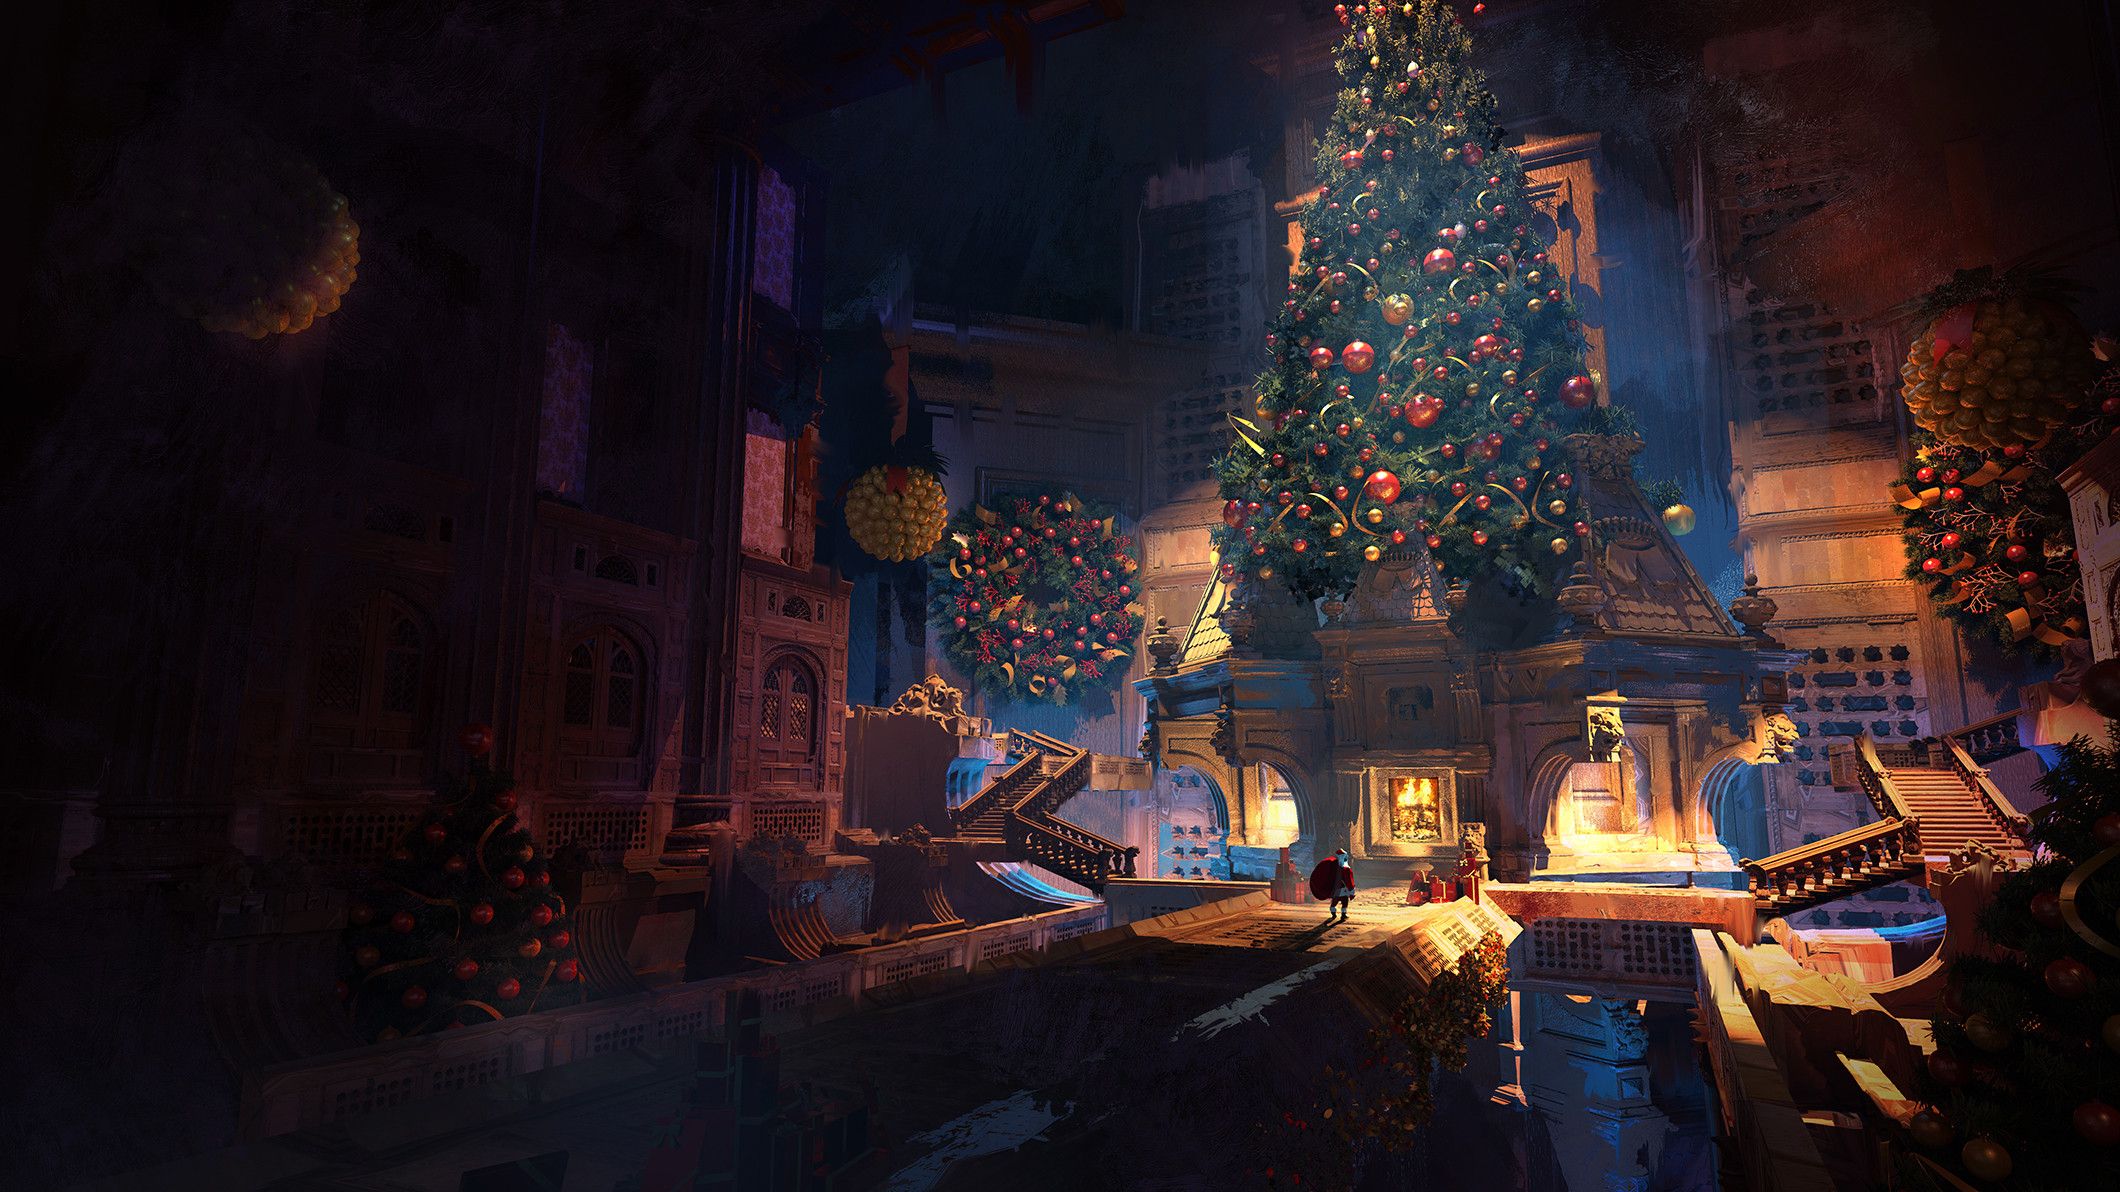 A digital painting of a large Christmas tree in a dark, ornate room. - Christmas lights